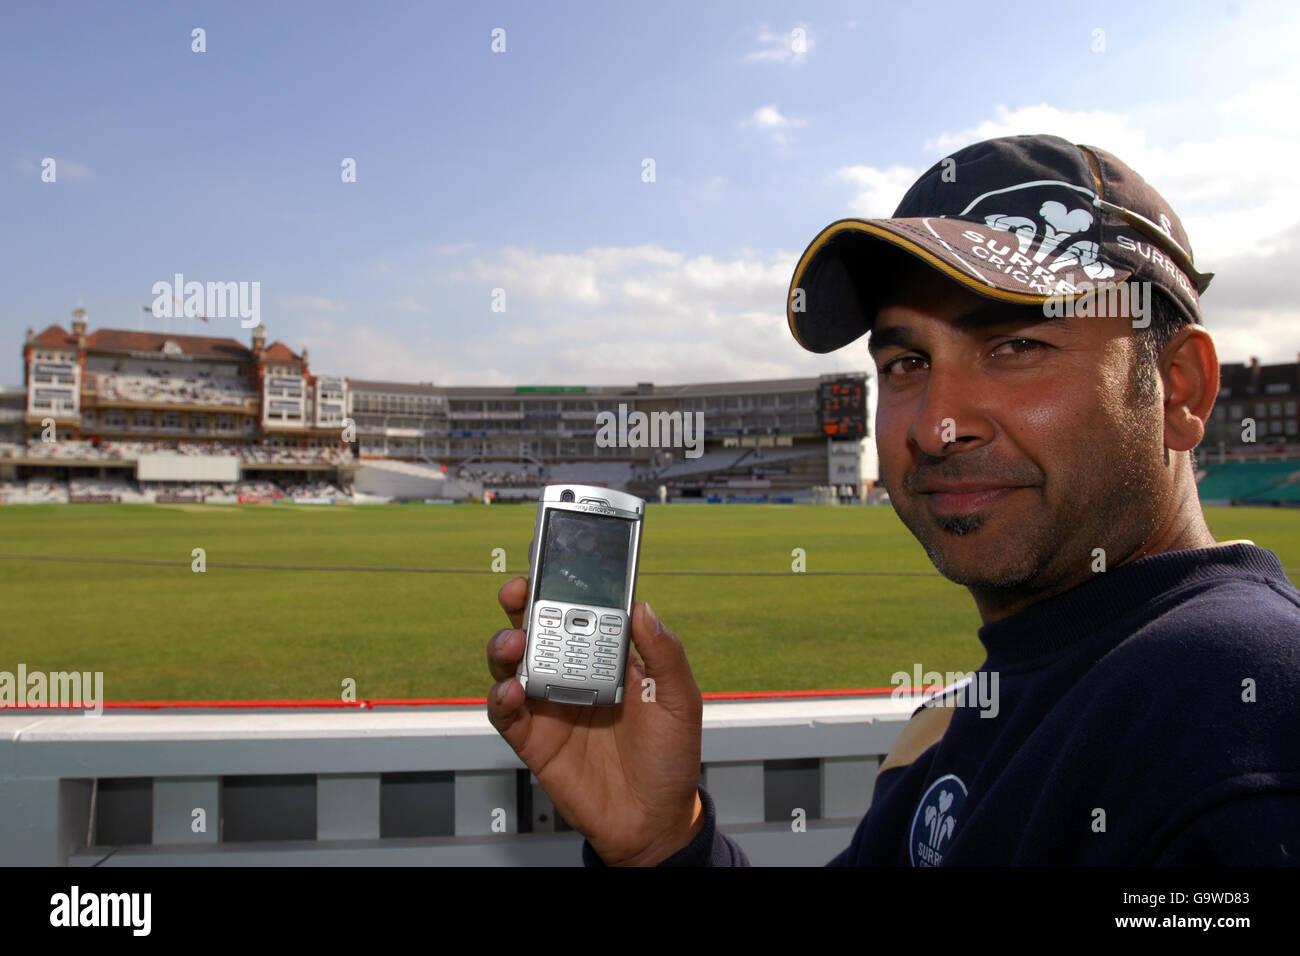 Cricket - Liverpool Victoria County Championship - Division One - Surrey v Yorkshire - The Brit Oval. Surrey second team coach Nadeem Shahid promotes the Surrey Text Service Stock Photo